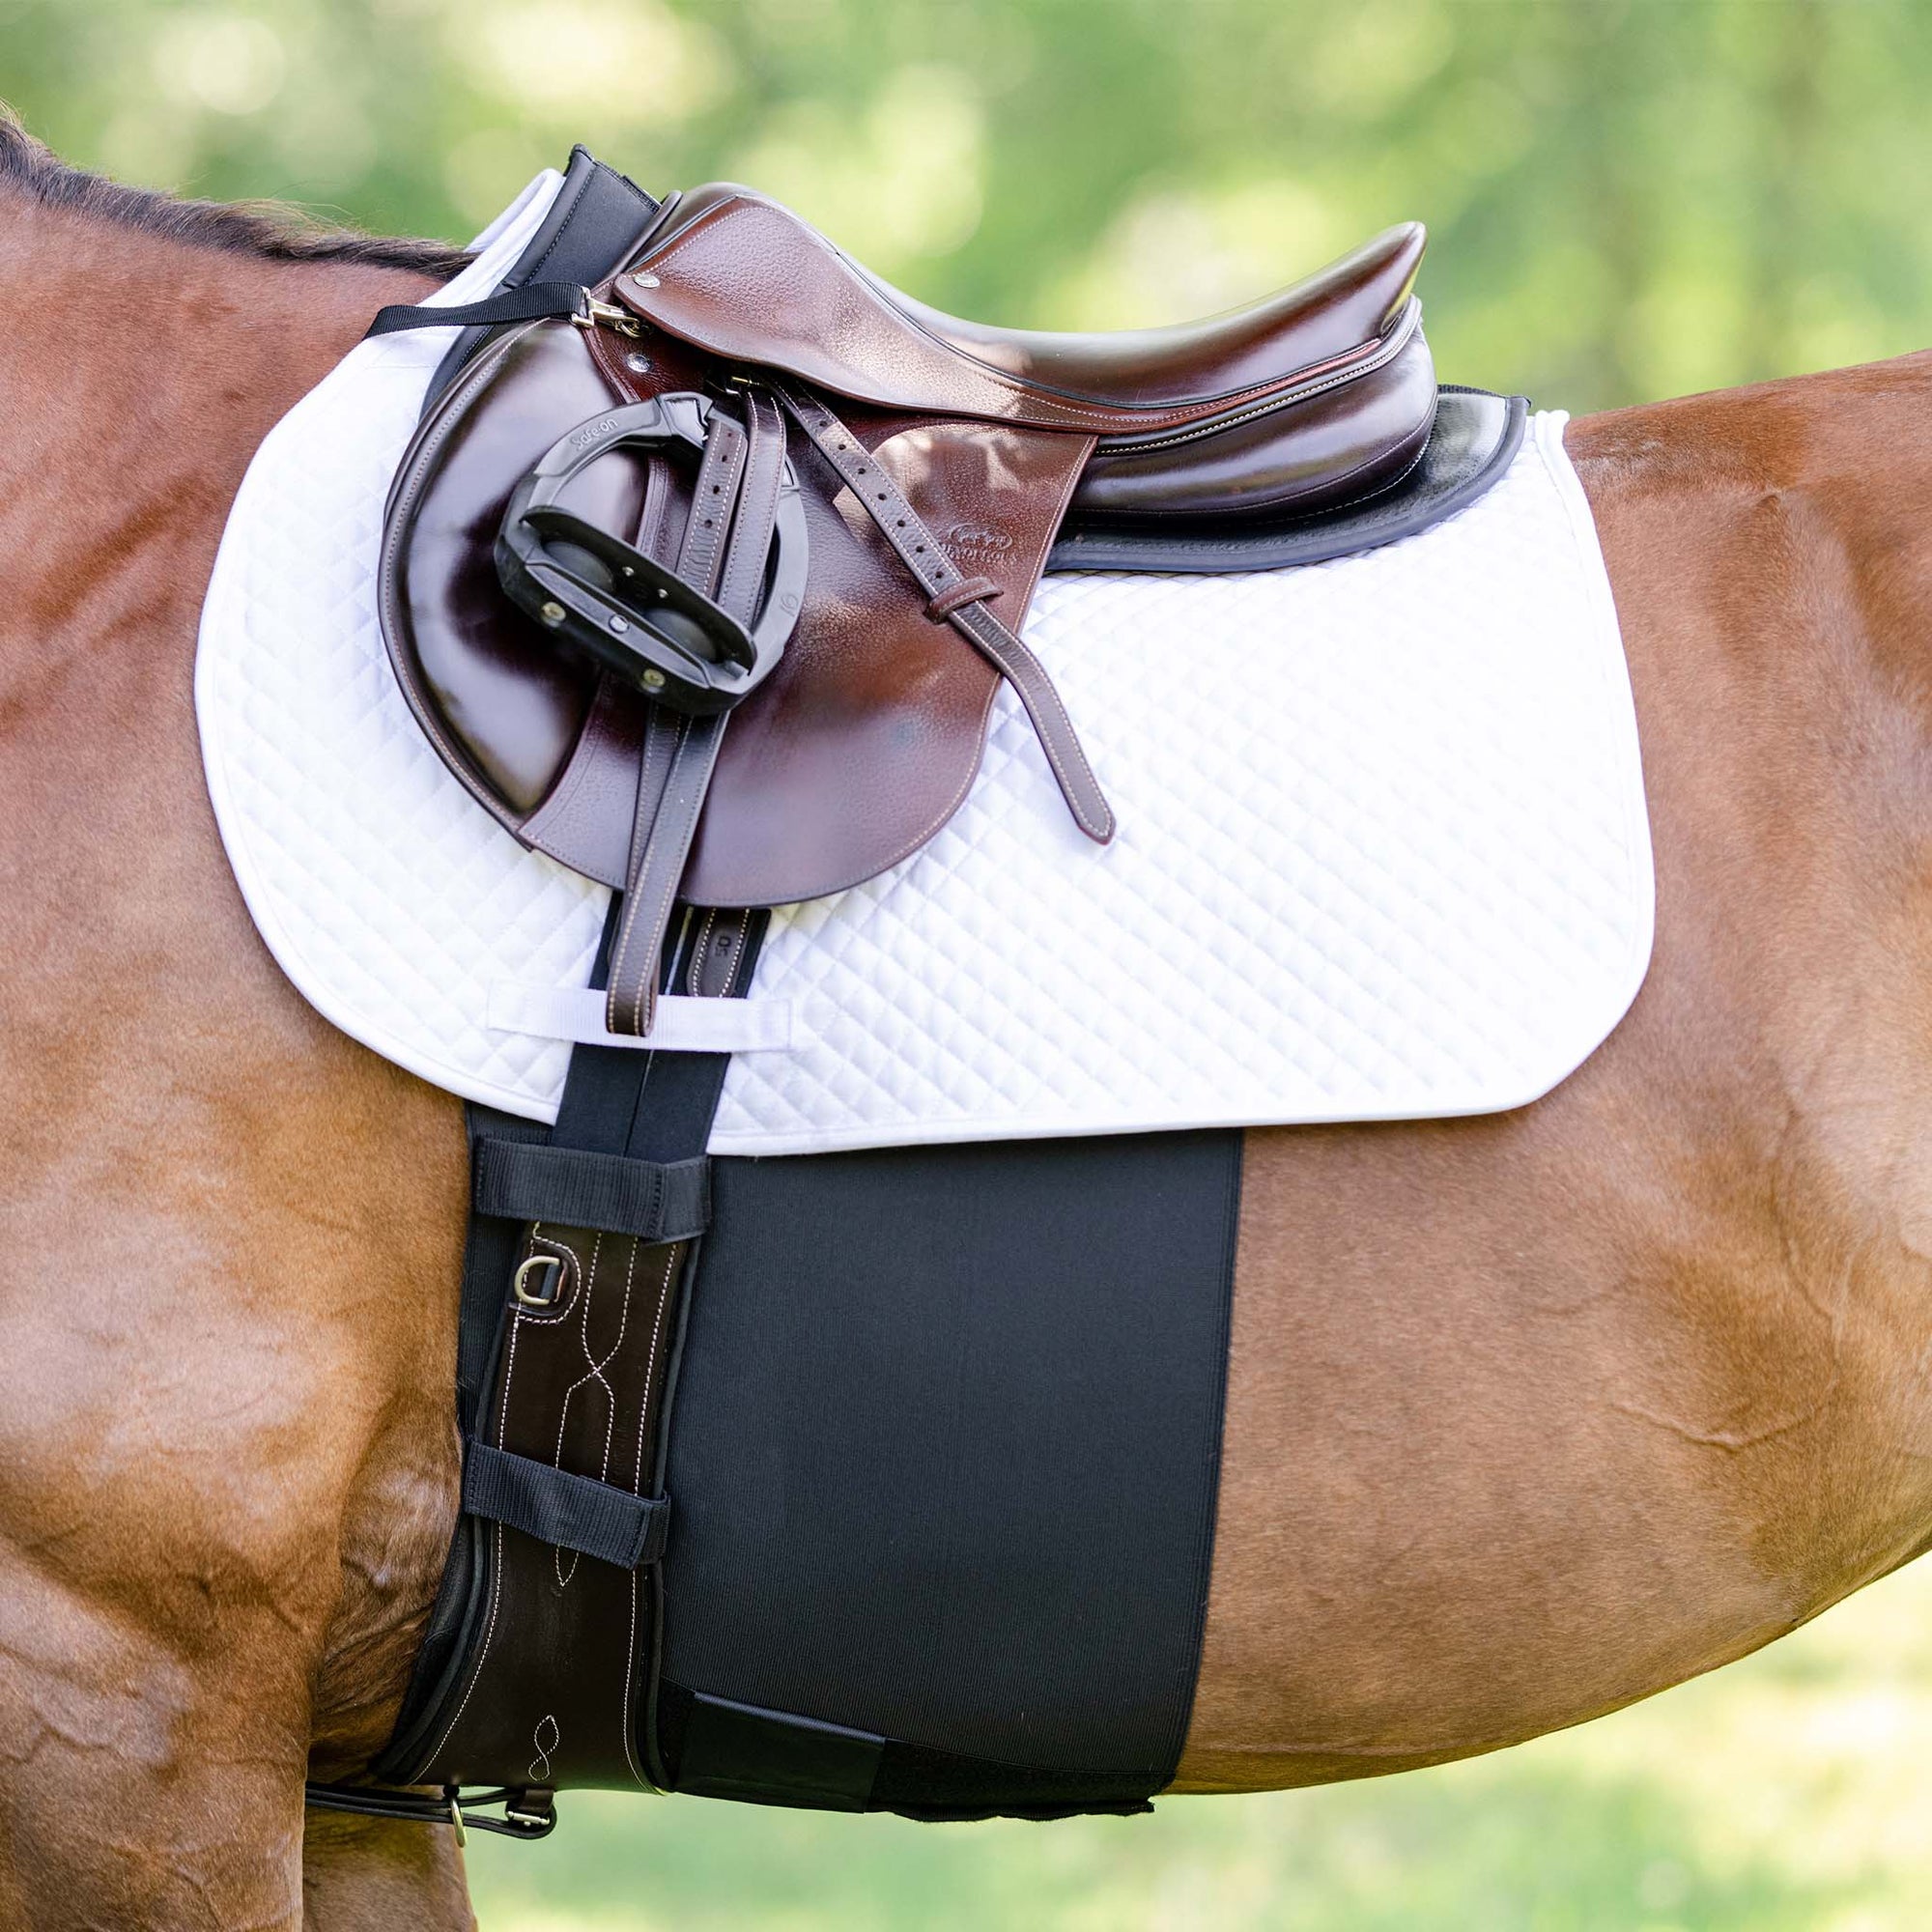 The BellyBand+ offers 16” of coverage to help protect against spur rubs, boot rubs & sores